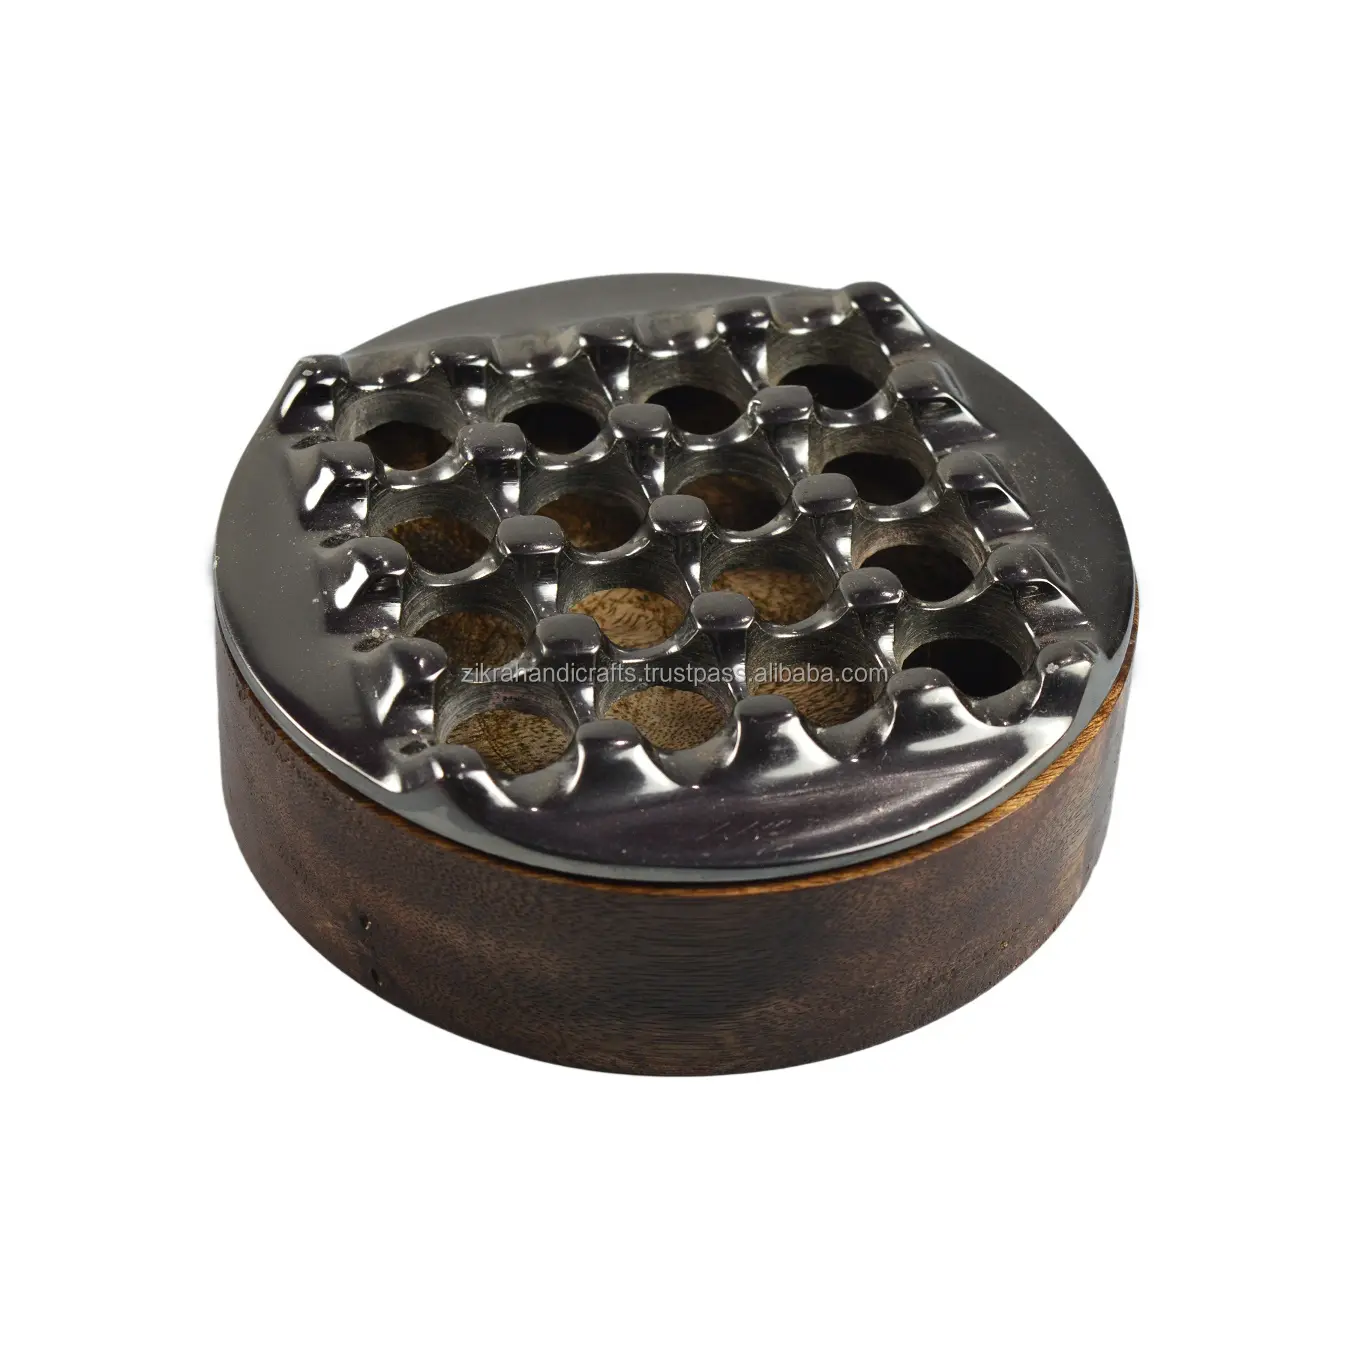 Standard Black Ashtray With Wooden Base Grid Cigar Ashtray Plated Finishing Garden Bar Home And Hotel Office Design Ashtrays